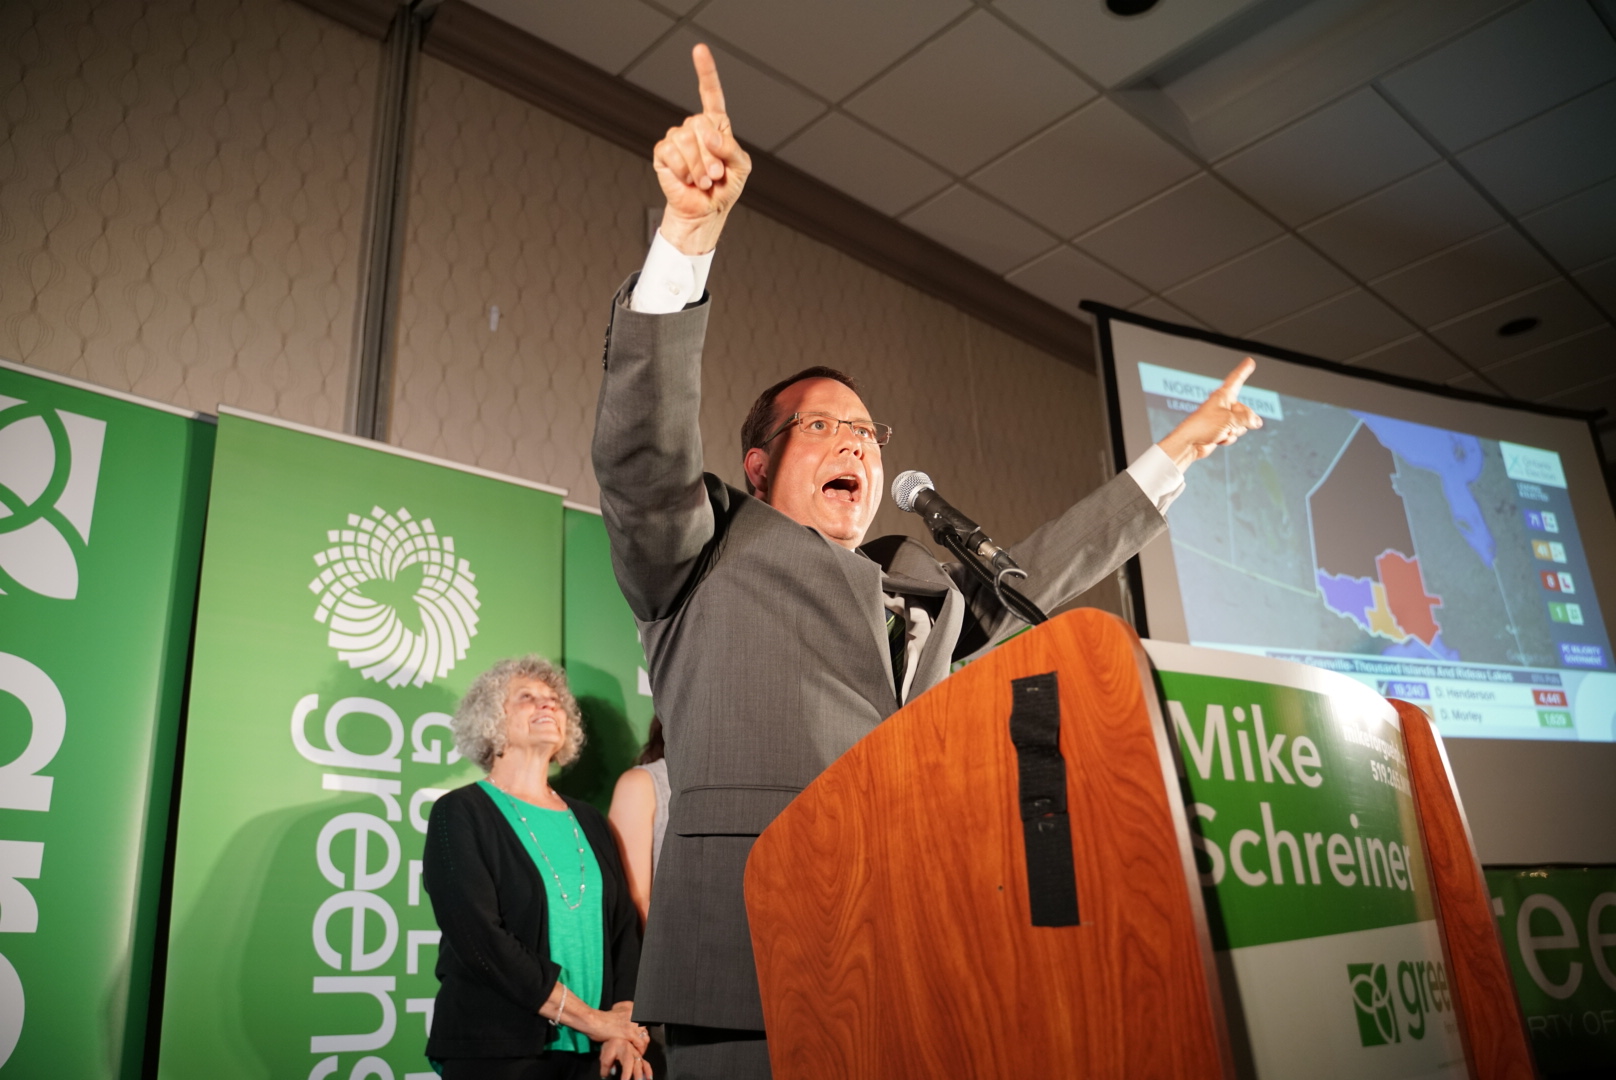 Mike Schreiner stands at a podium, looking animated, with both arms raised, pointing into the air.